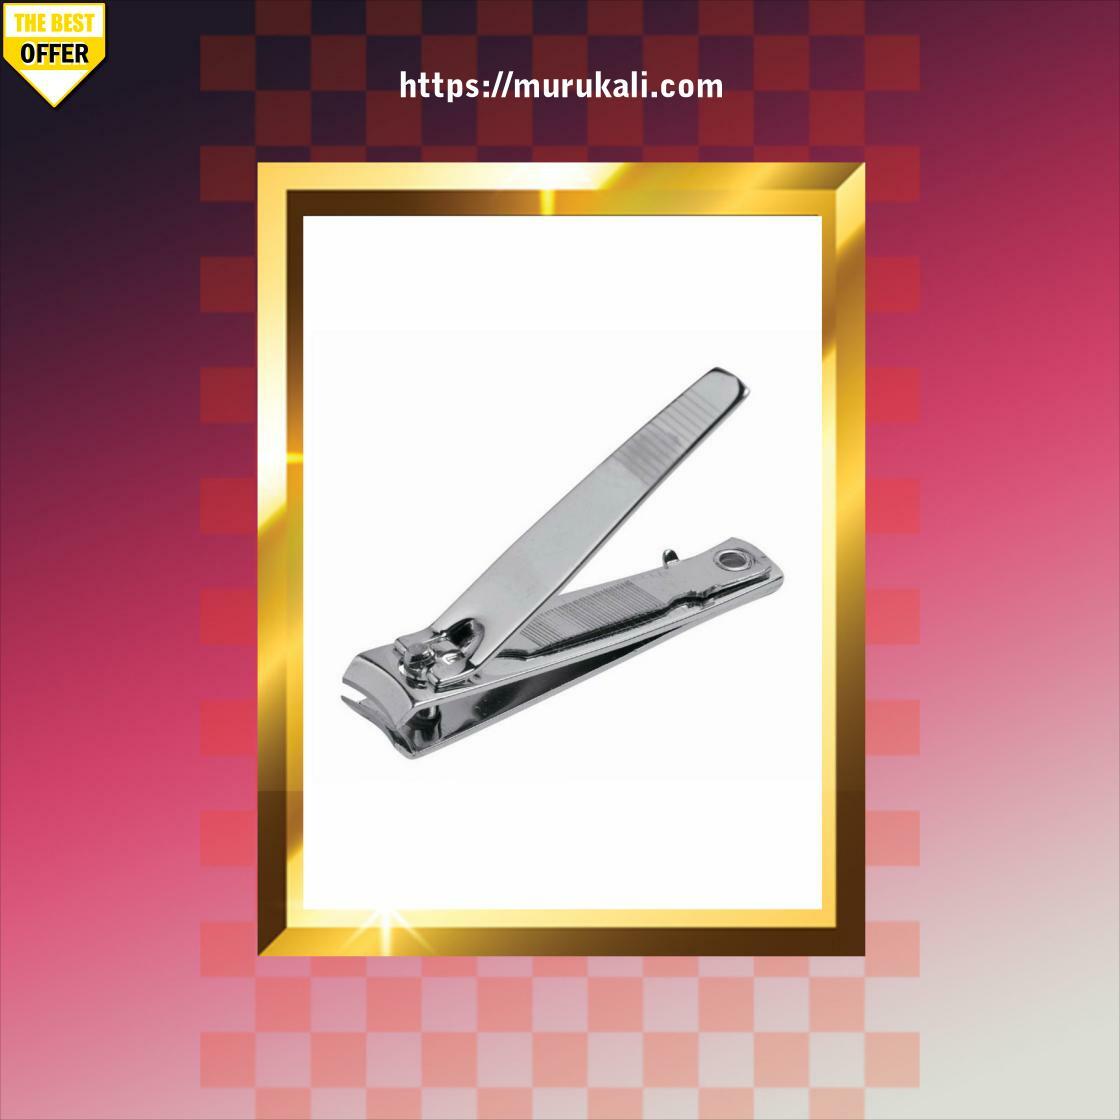 #homedeliveryservice #hotsale Nail Clipper
RWF3200
Get here murukali.com/products/nail-…